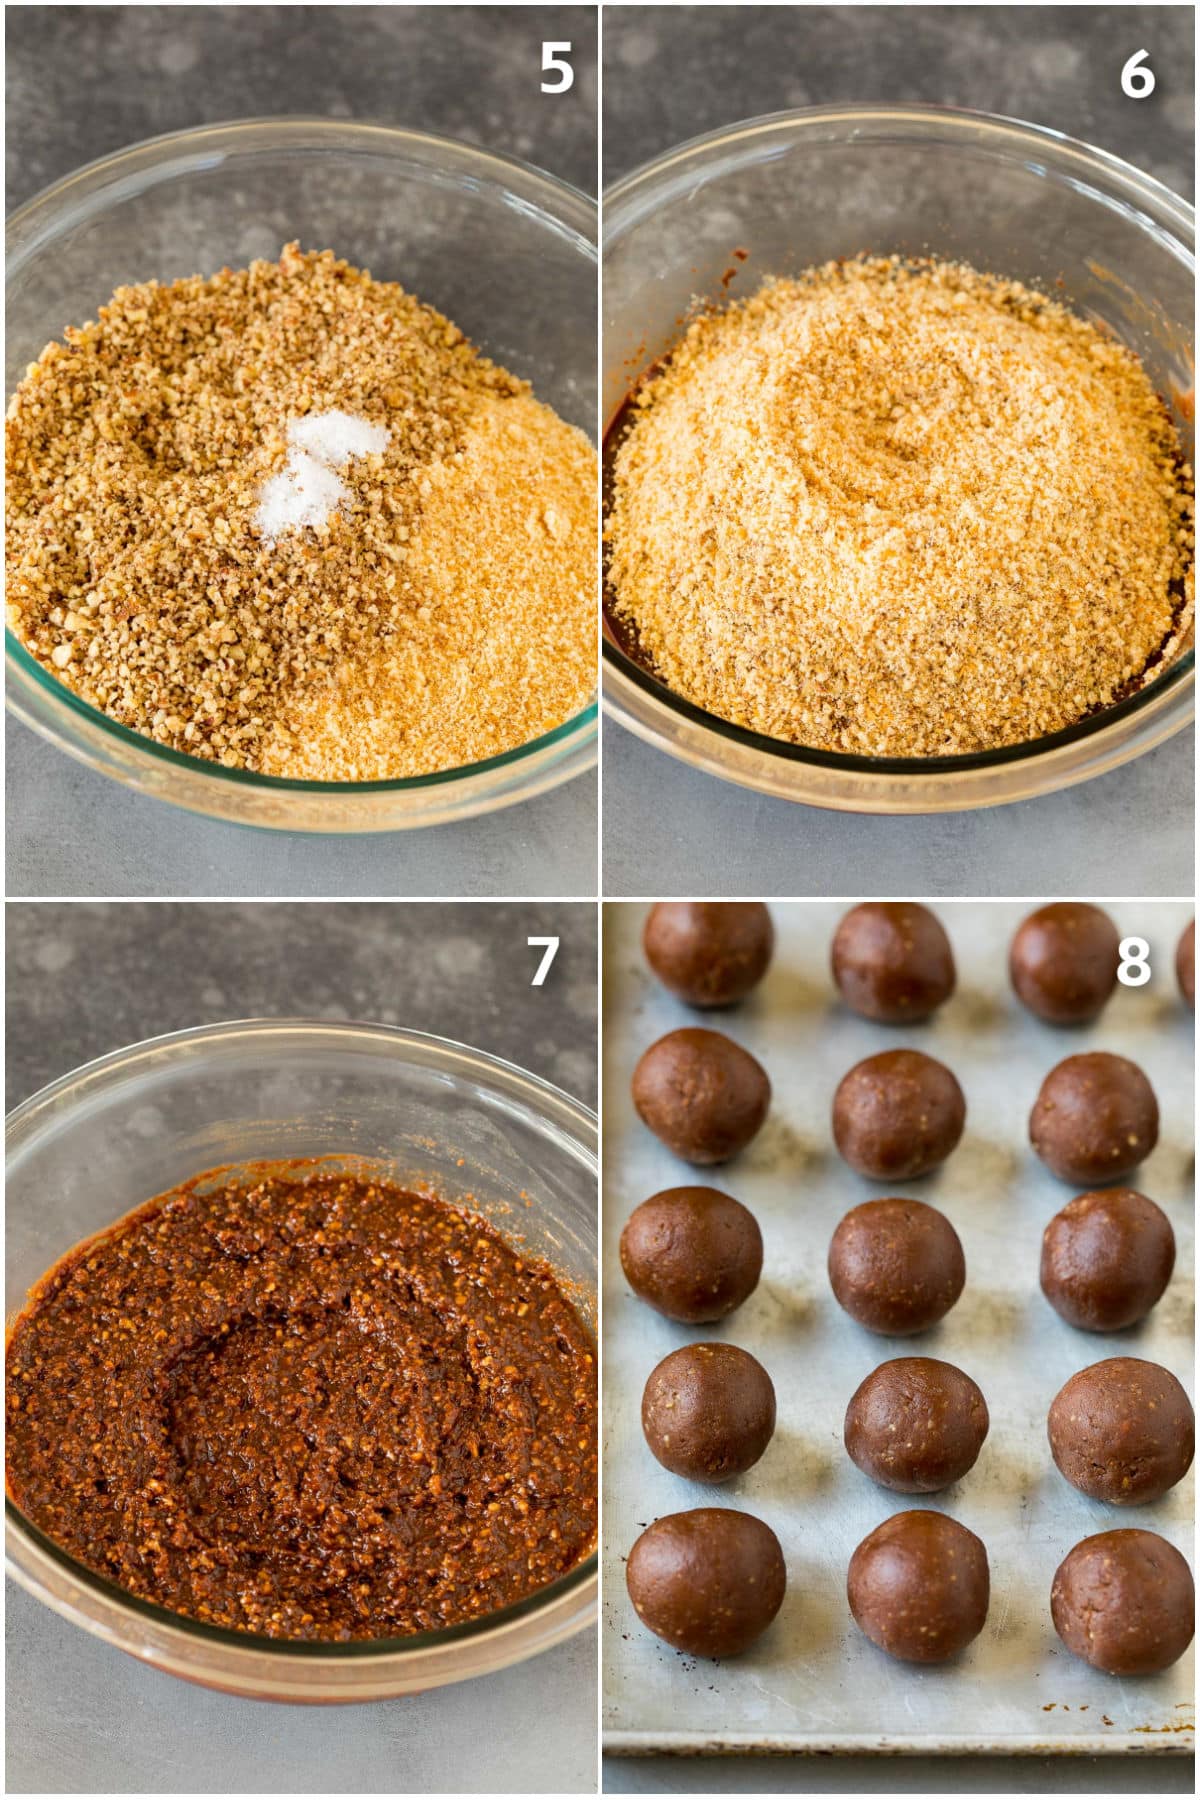 Process photos showing rum balls being made.